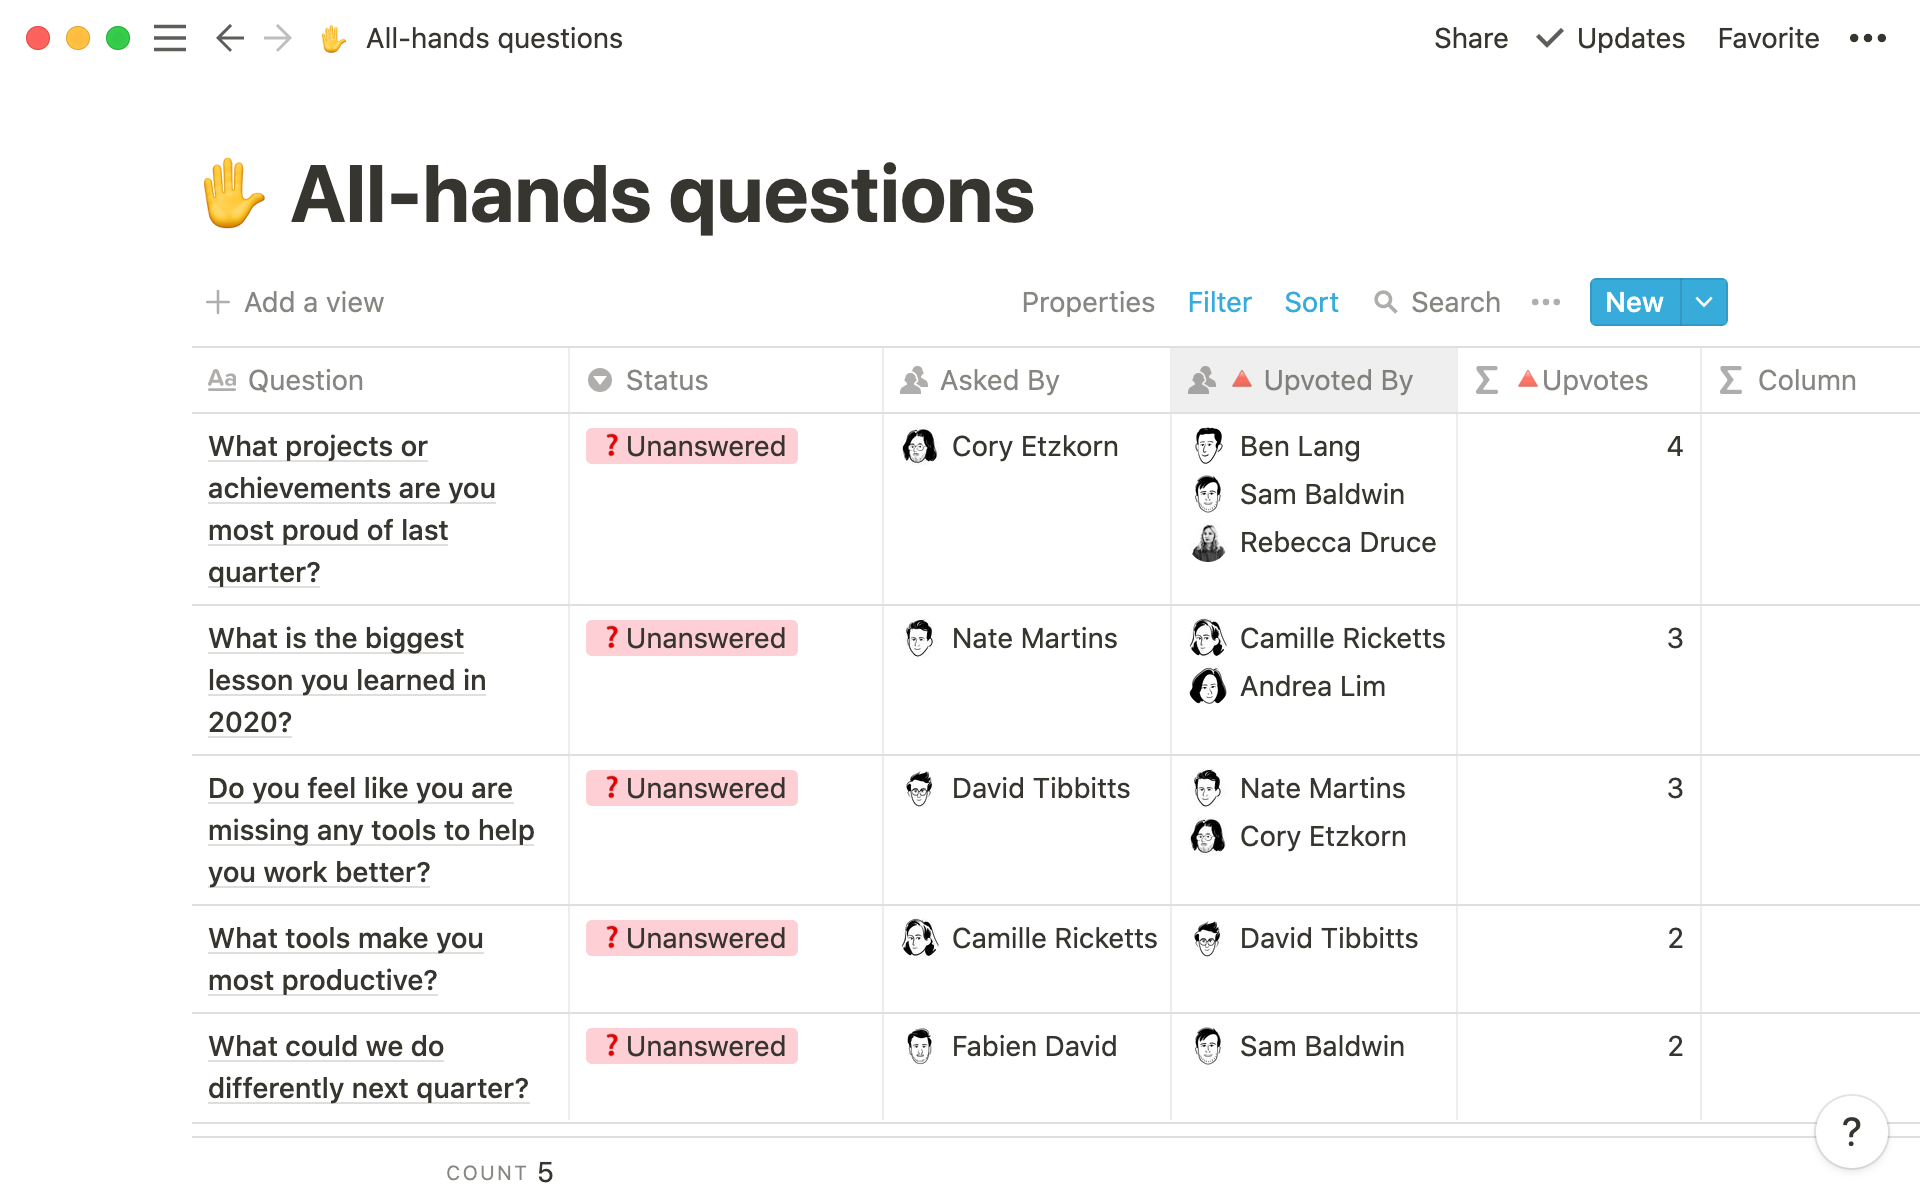 Everyone can ask questions to be answered at the next all-hands.